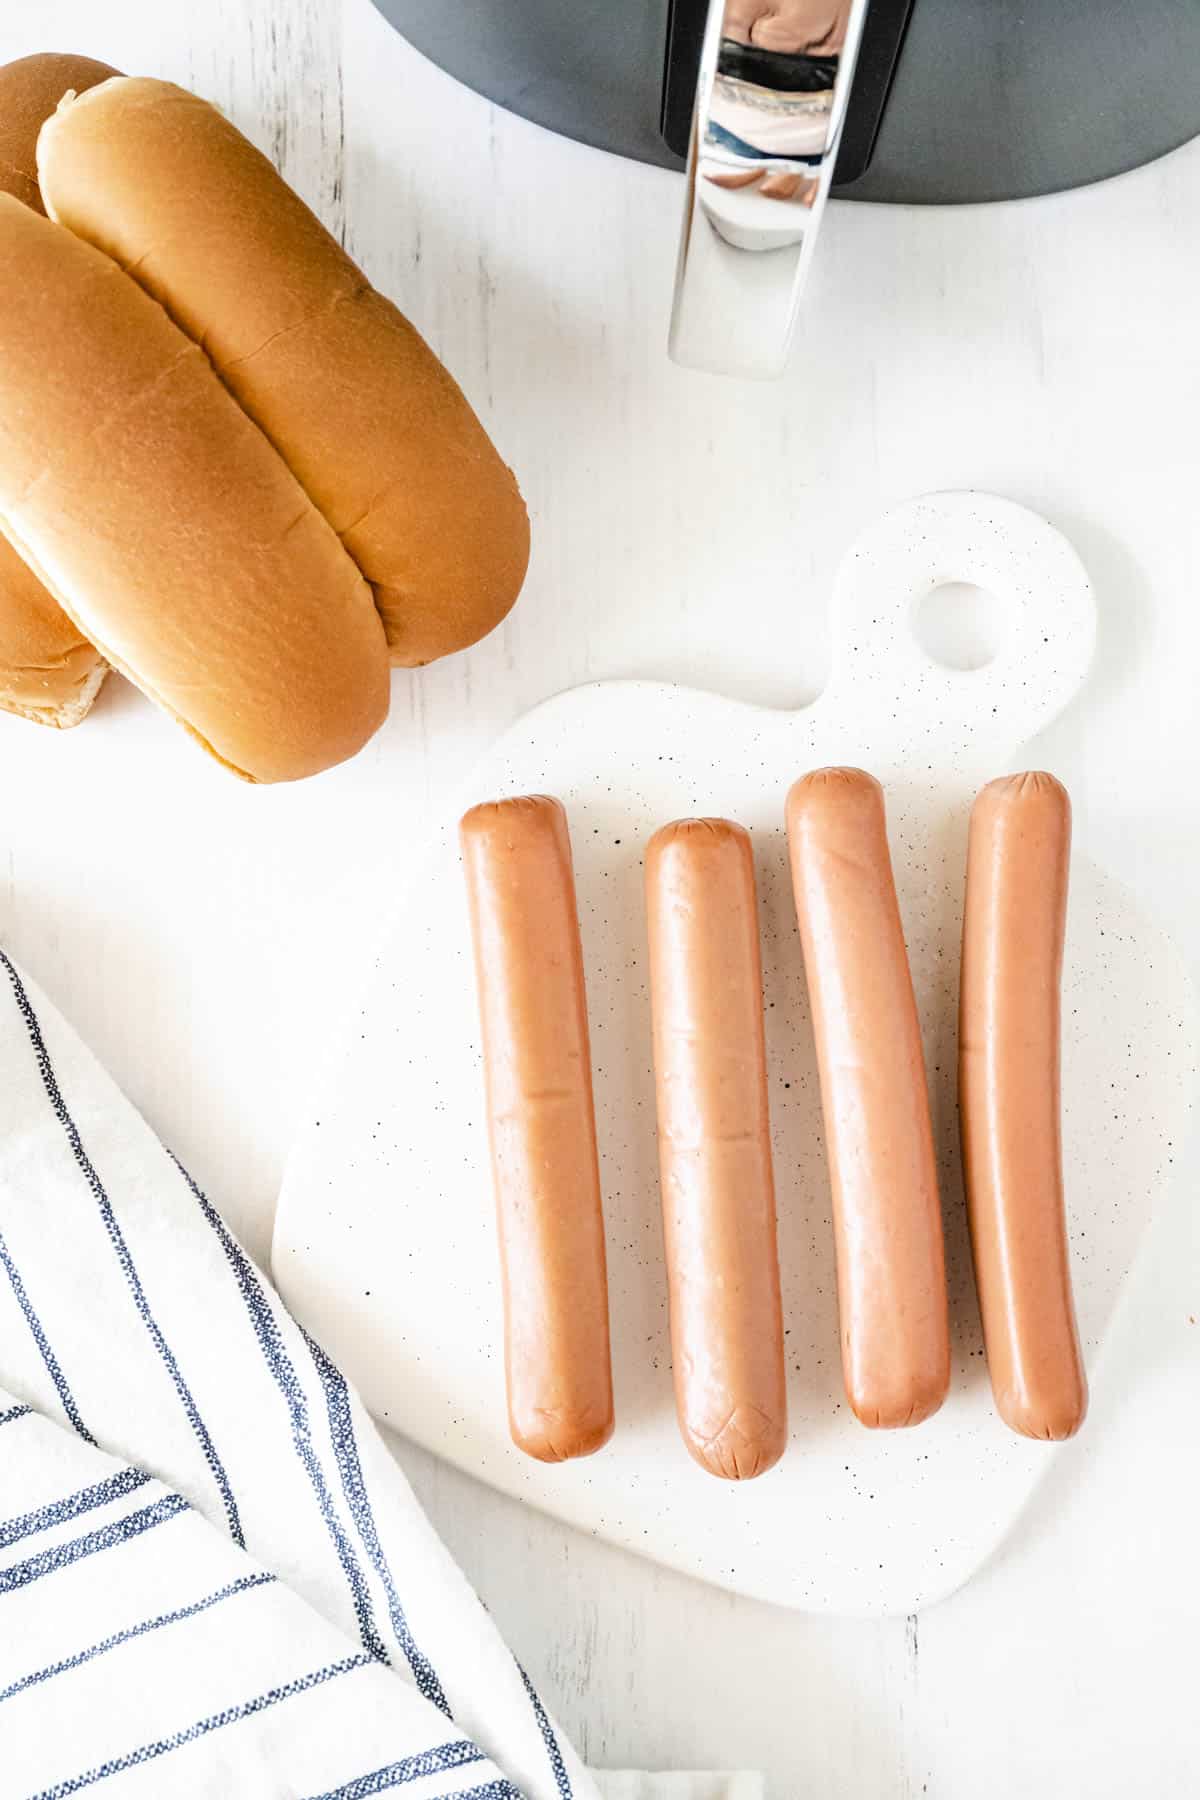 Image of ingredients needed for air fryer hot dogs - 4 hot dogs on a cutting board surrounded by hot dog buns, an air fryer, and a tea towel.